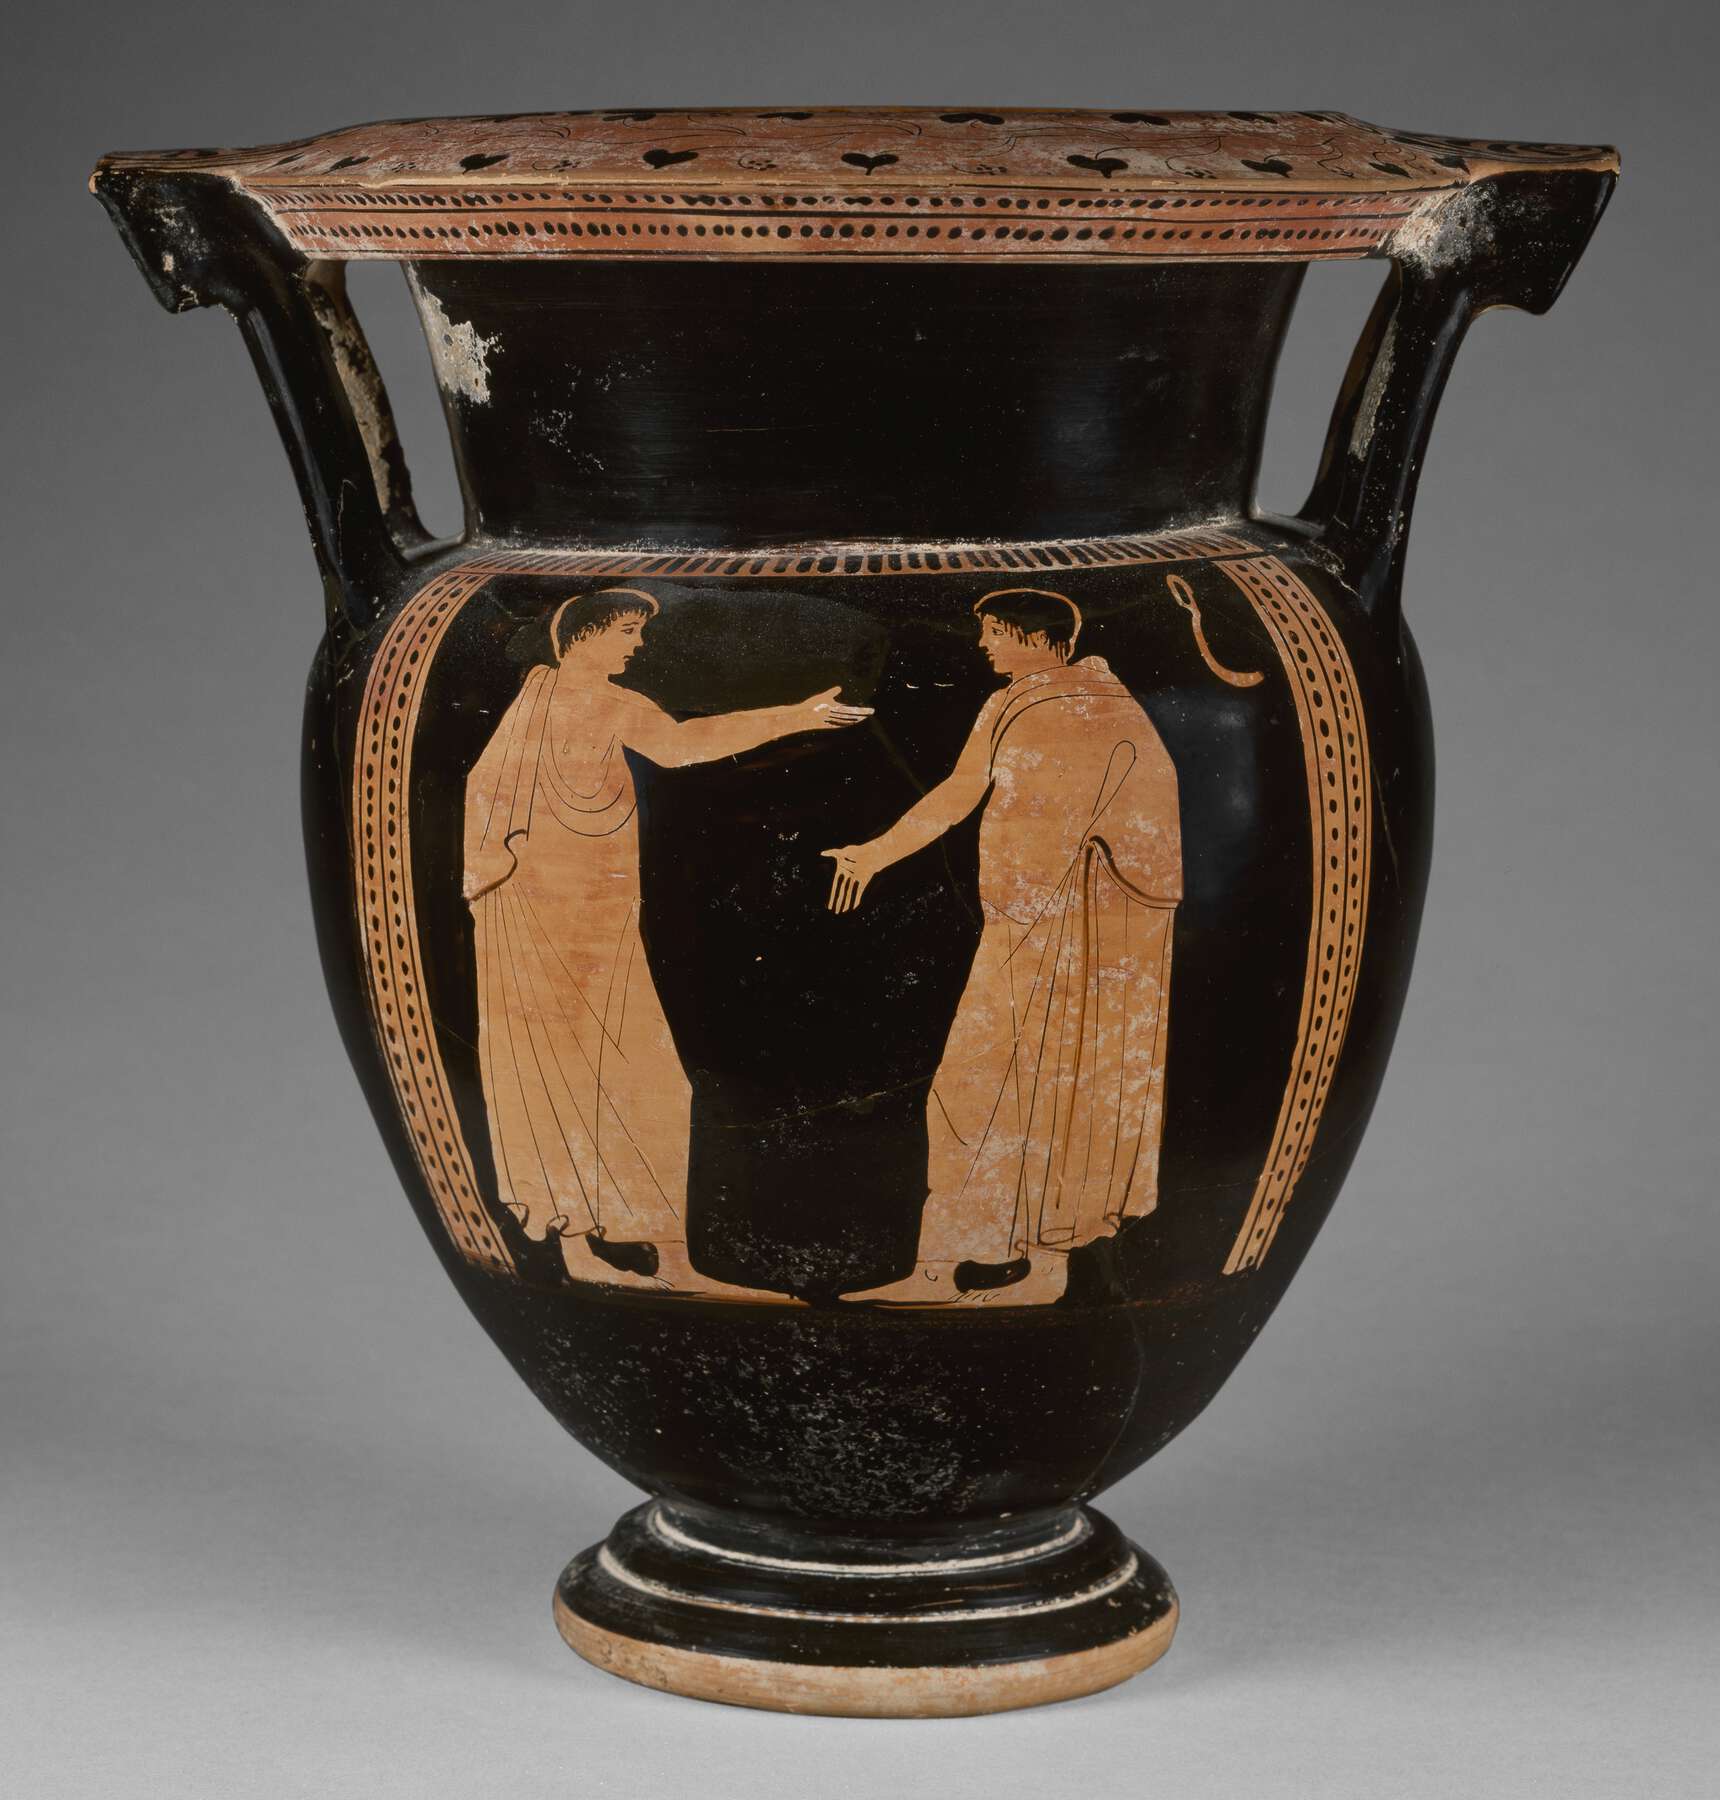 Another view of the vase, the body decoration showing two people in clothes